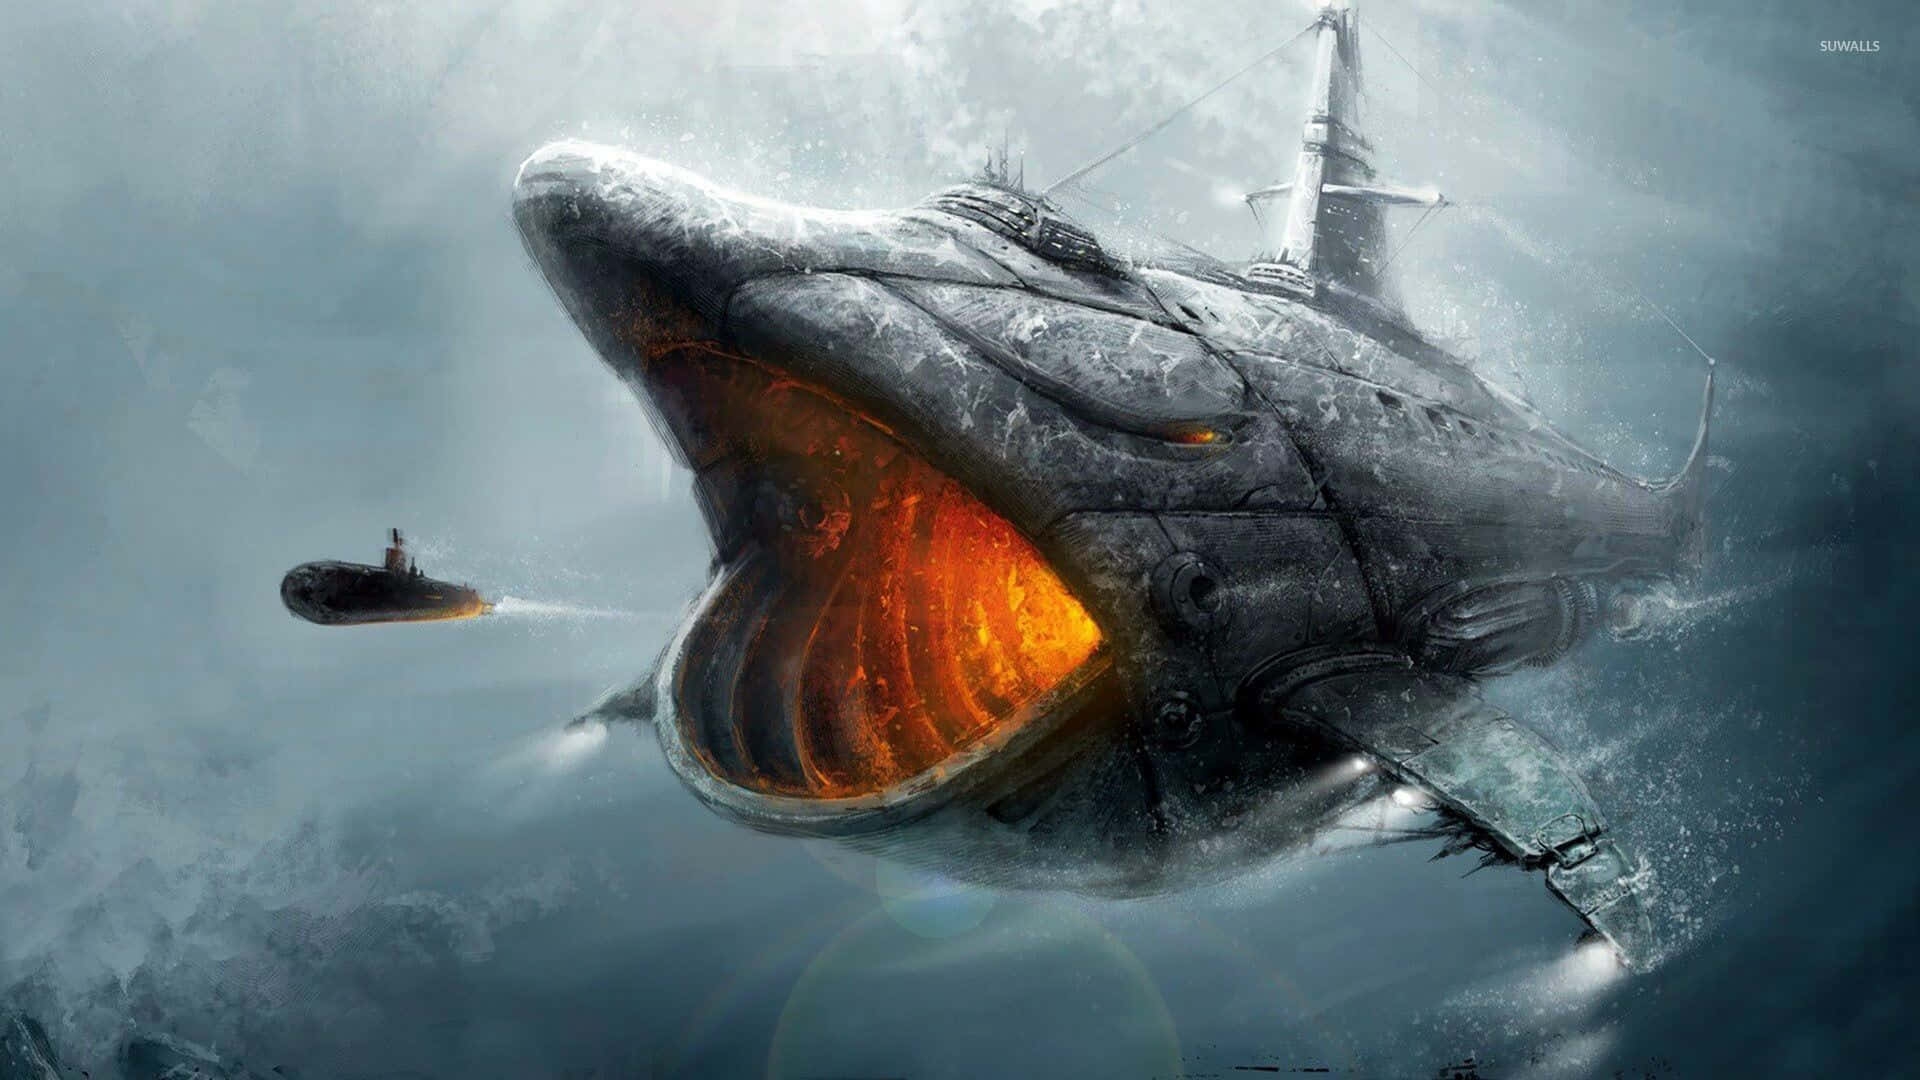 The Mighty Megalodon in its Underwater Realm